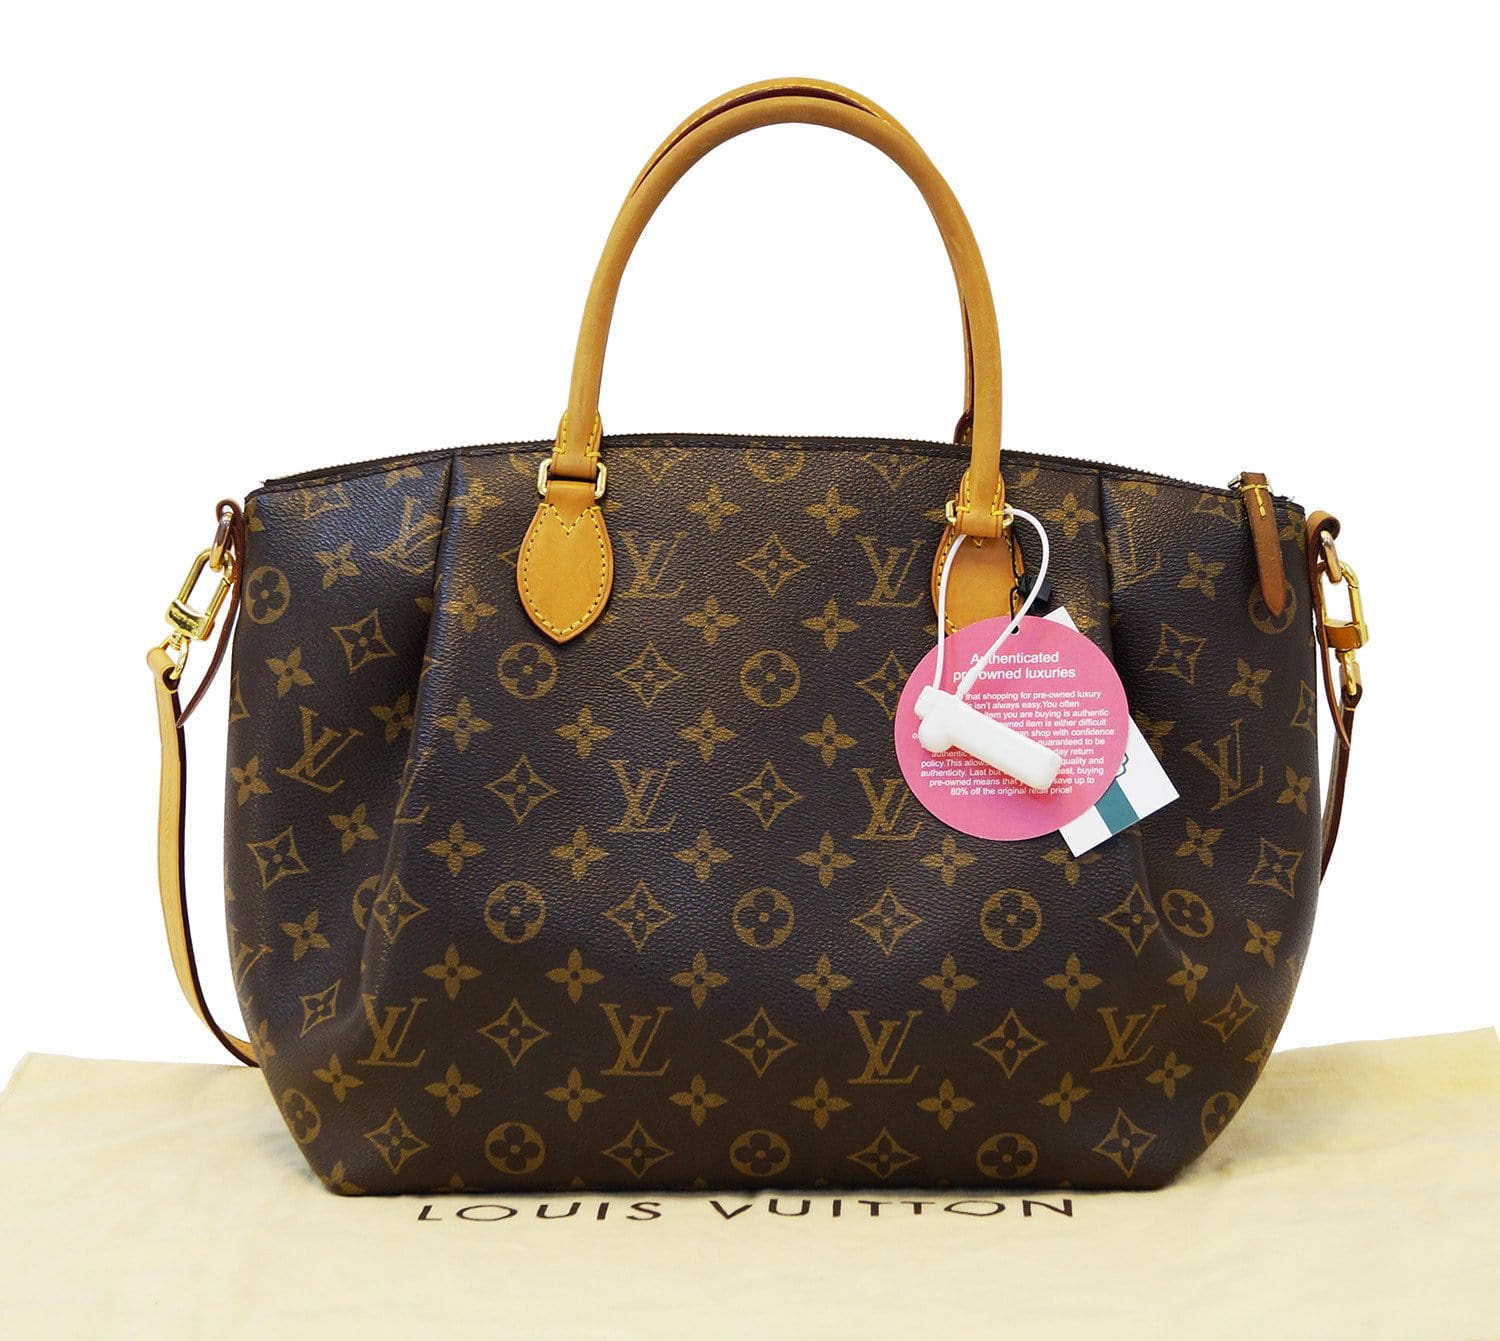 How To Tell If A Louis Vuitton Bag Is Real Or Fake [7 EASY WAYS] 